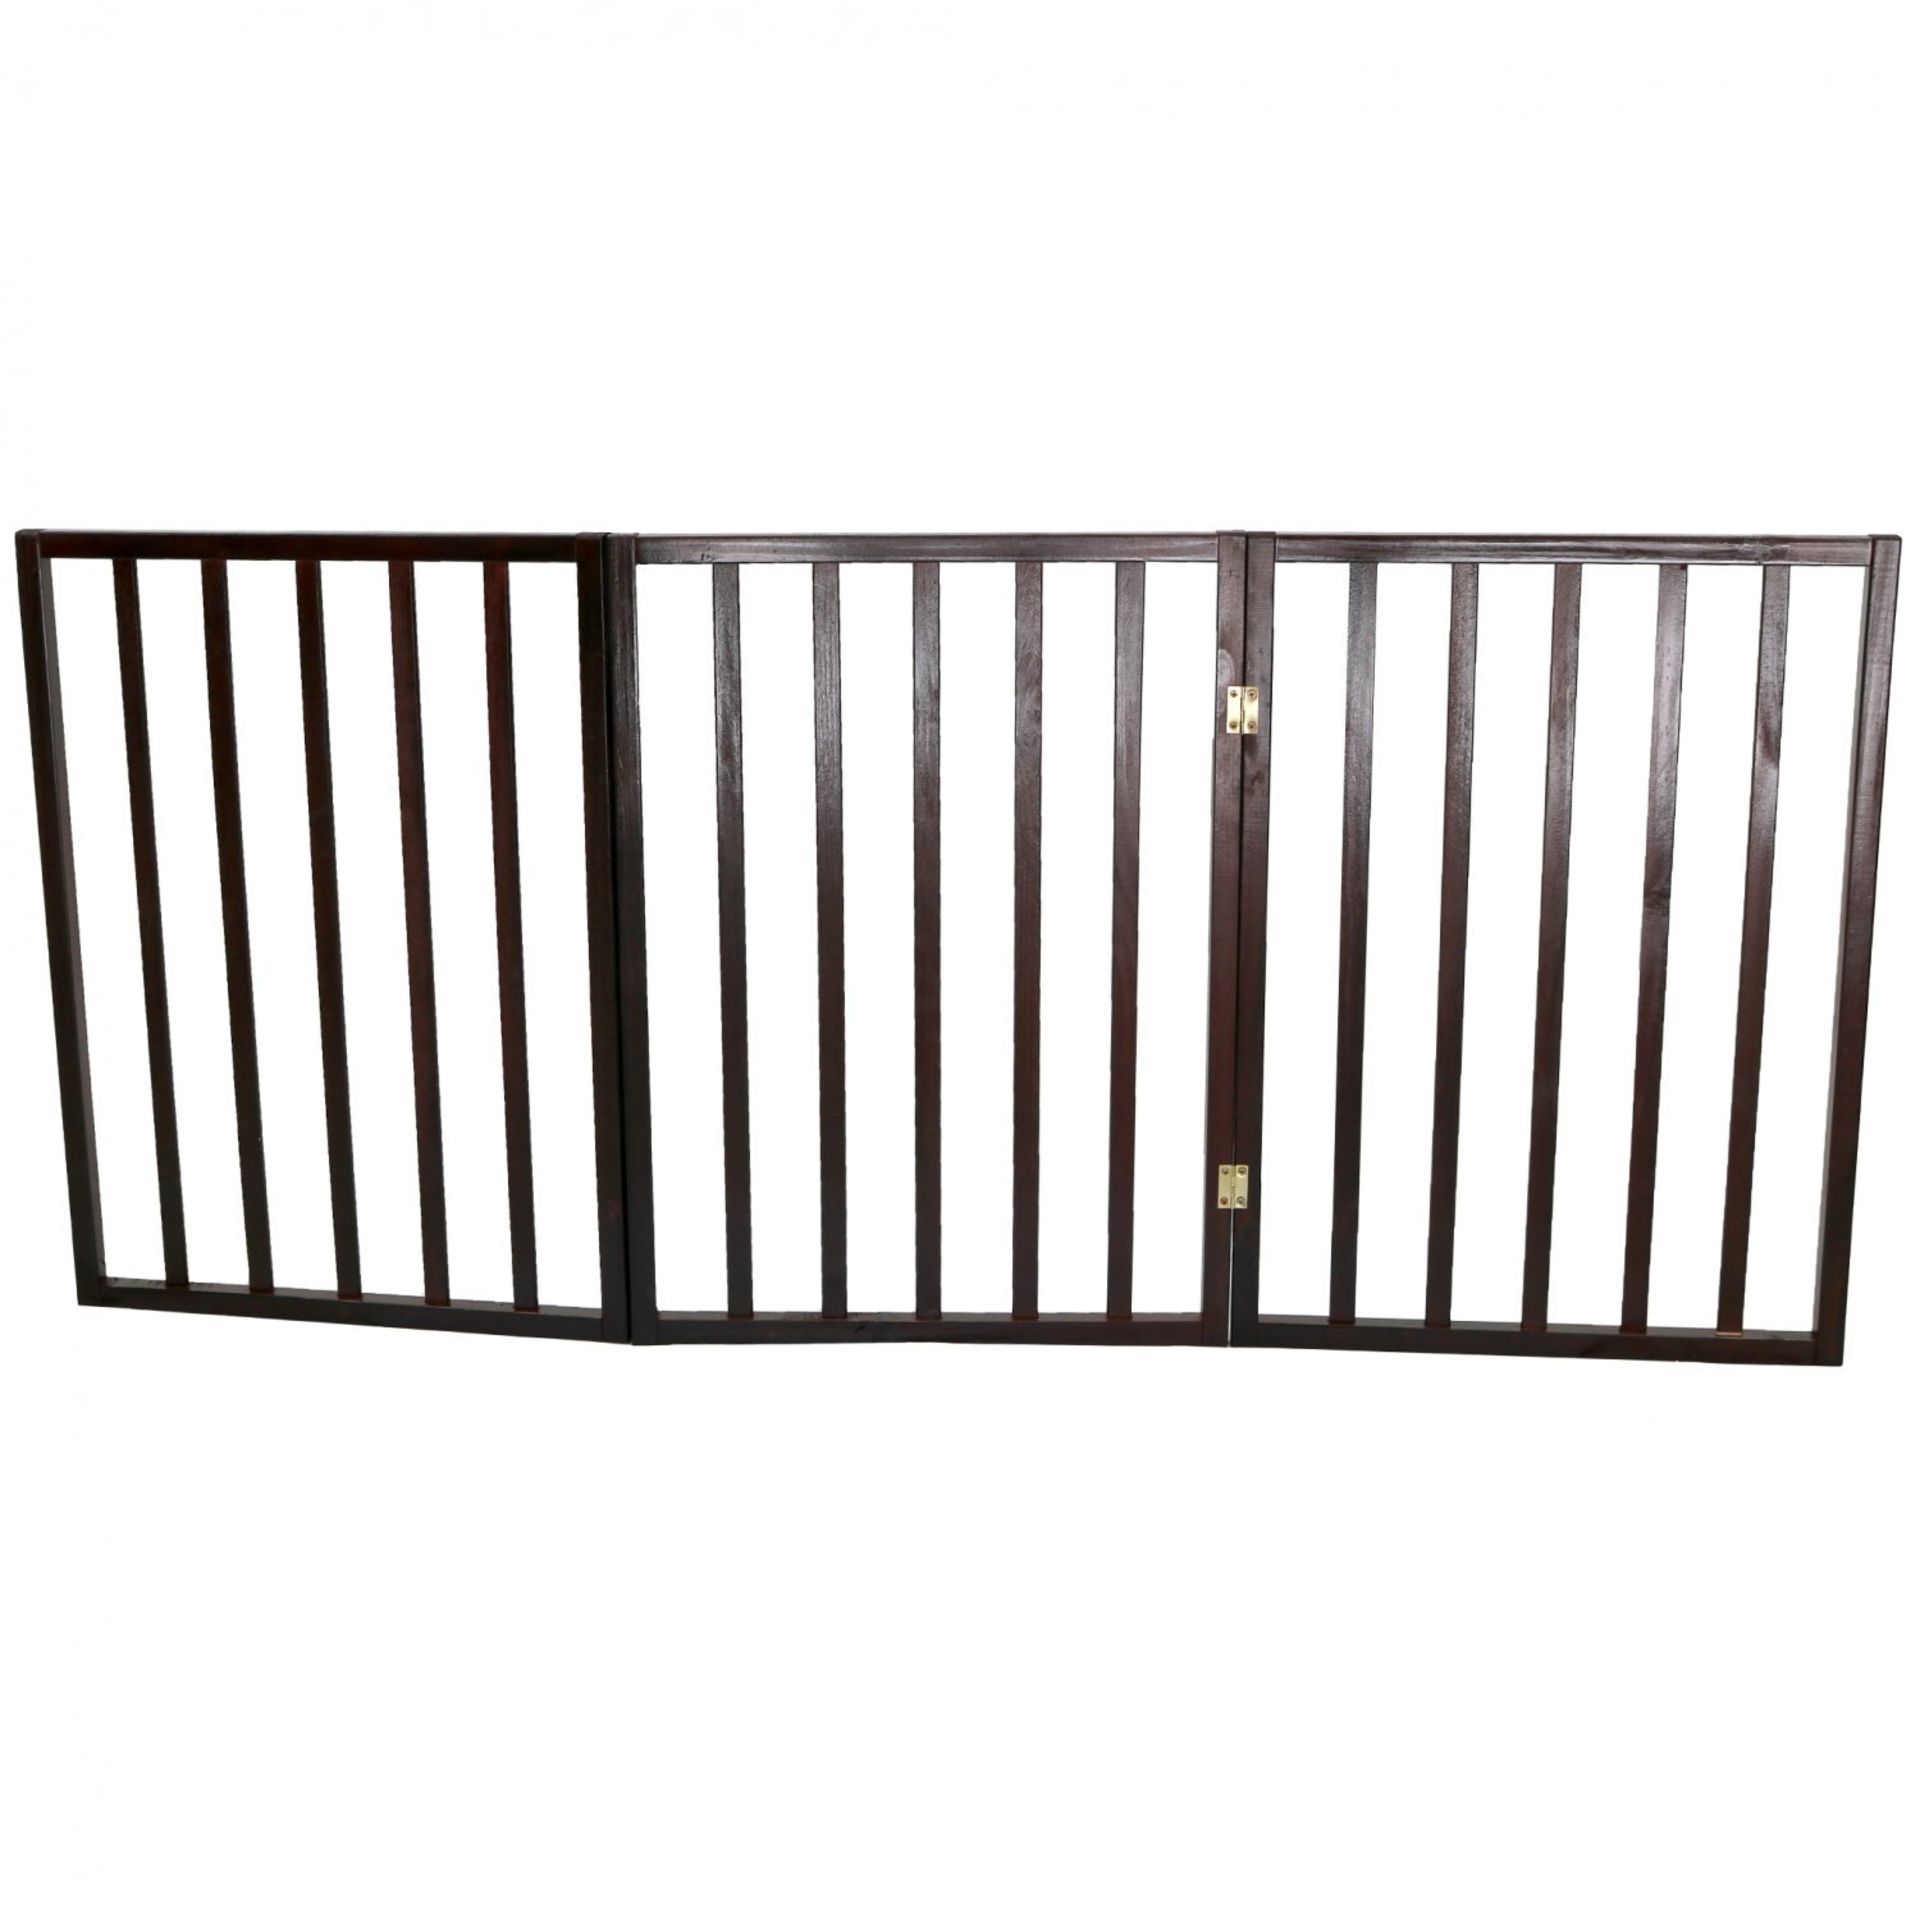 (RL31) Dog Safety Folding Wooden Pet Gate Portable Indoor Barrier Keep your dog from tread... - Image 2 of 2